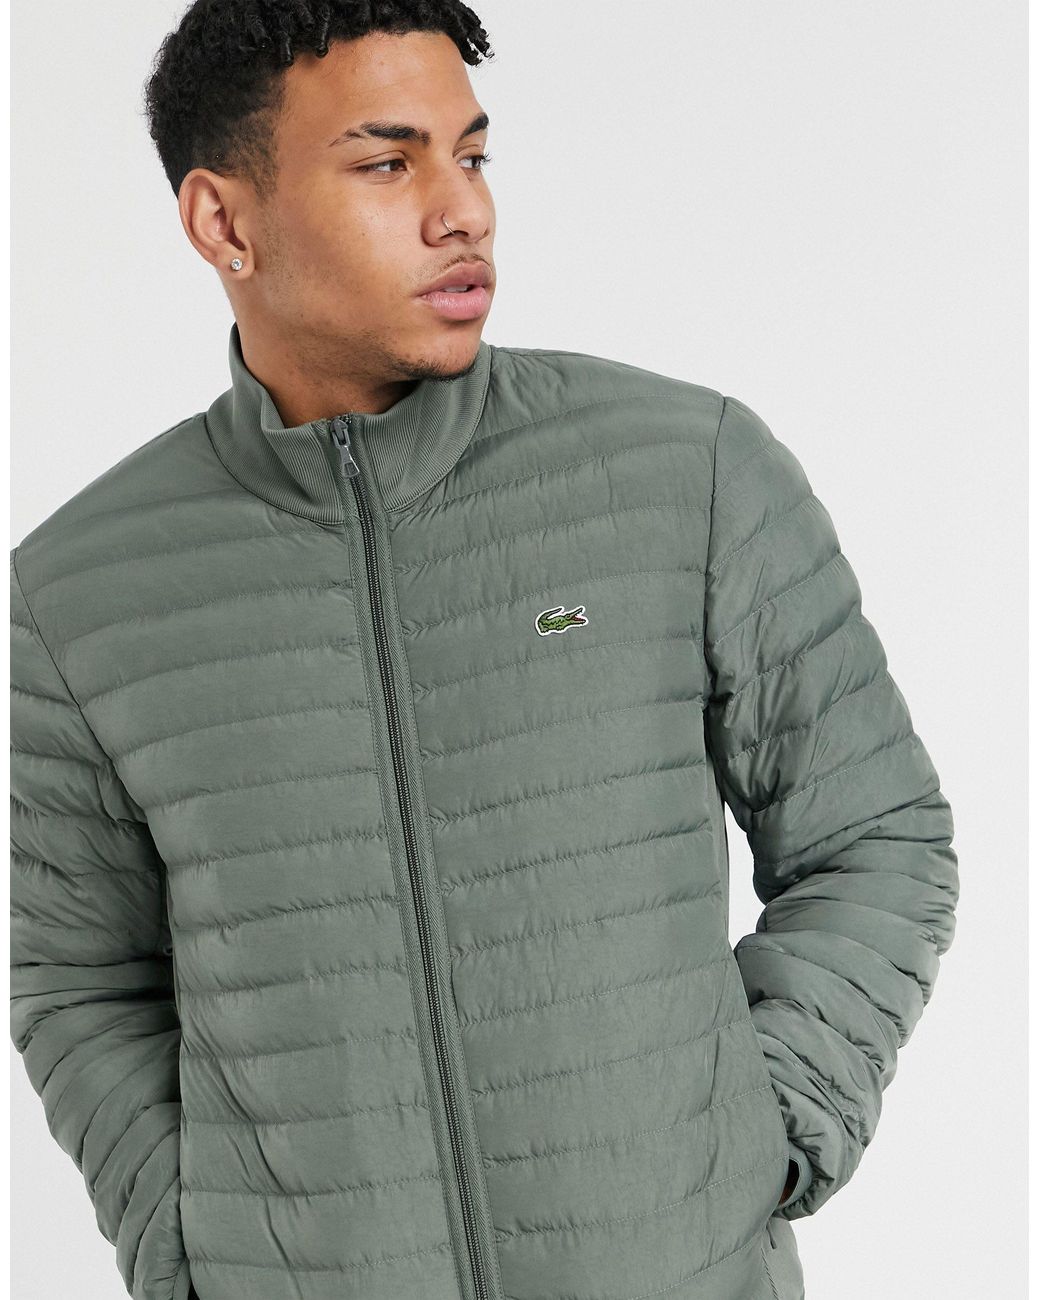 Lacoste Combinable Collapsible Lightweight Zip Jacket in Green for Men | Lyst